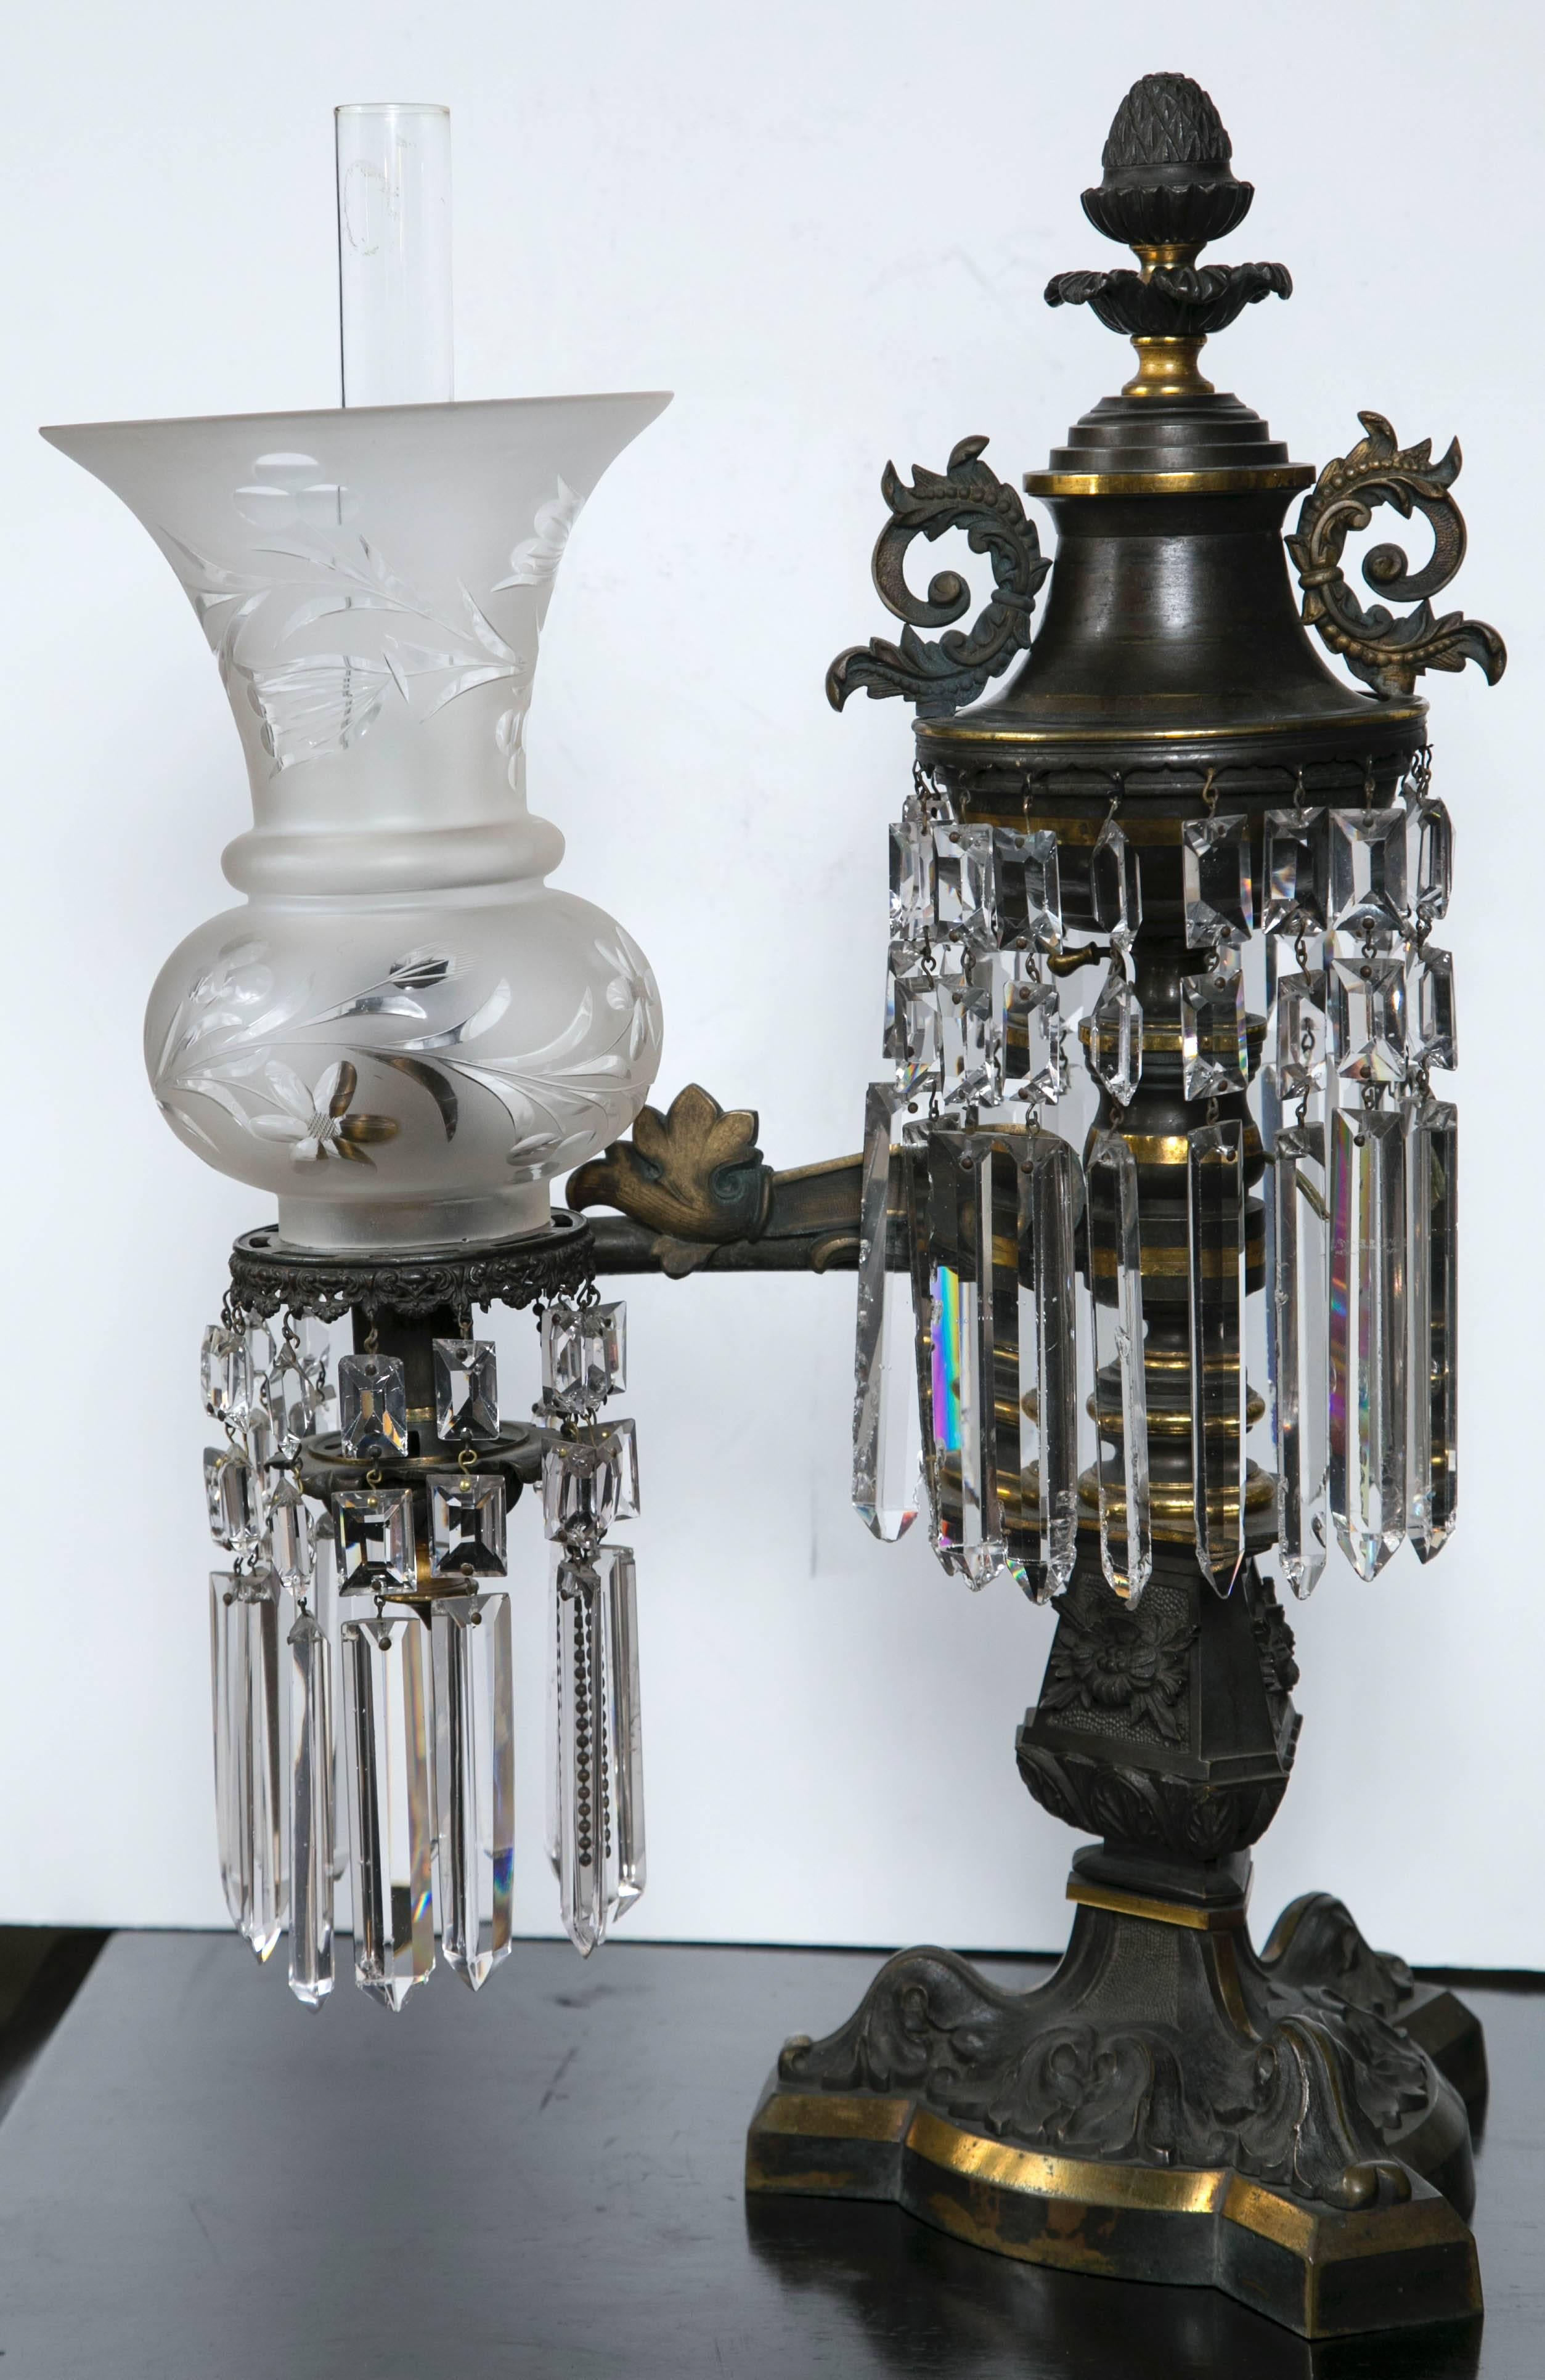 This pair is unsigned, but of high quality cast and chased bronze. There is a narrow hurricane shade wtihin the flared frosted and cut-glass outer shade. Scrolls of acanthus leaf and other designs, with an acorn finial atop. Some drop crystals might